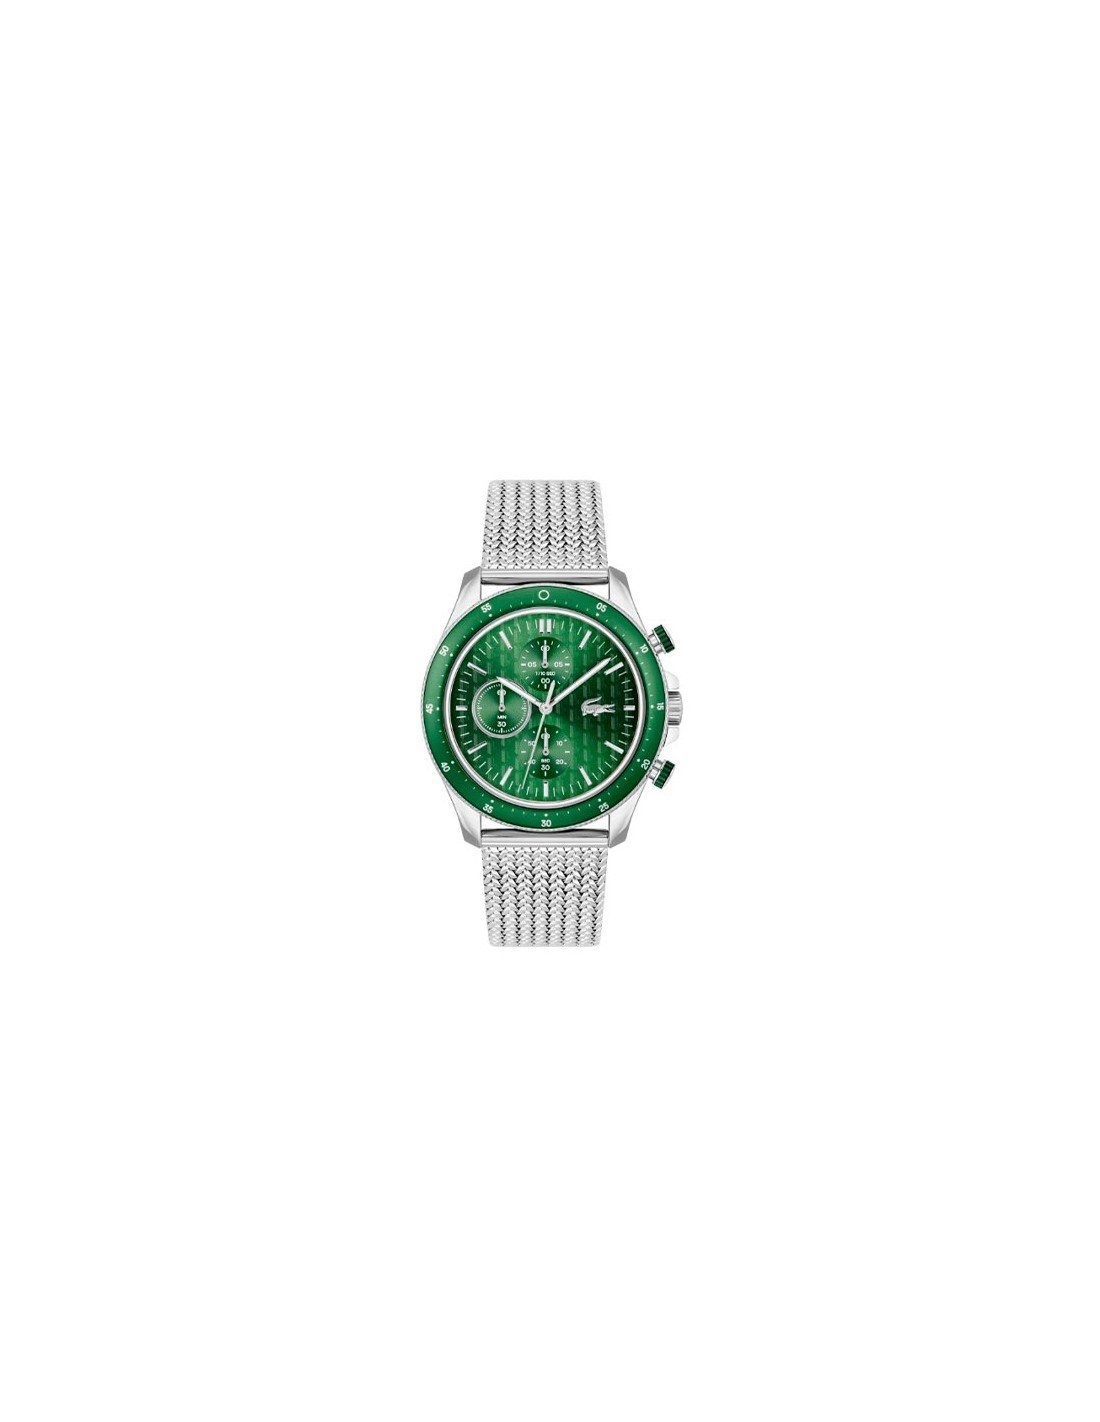 & Neoheritage Silver Lacoste Green Watch